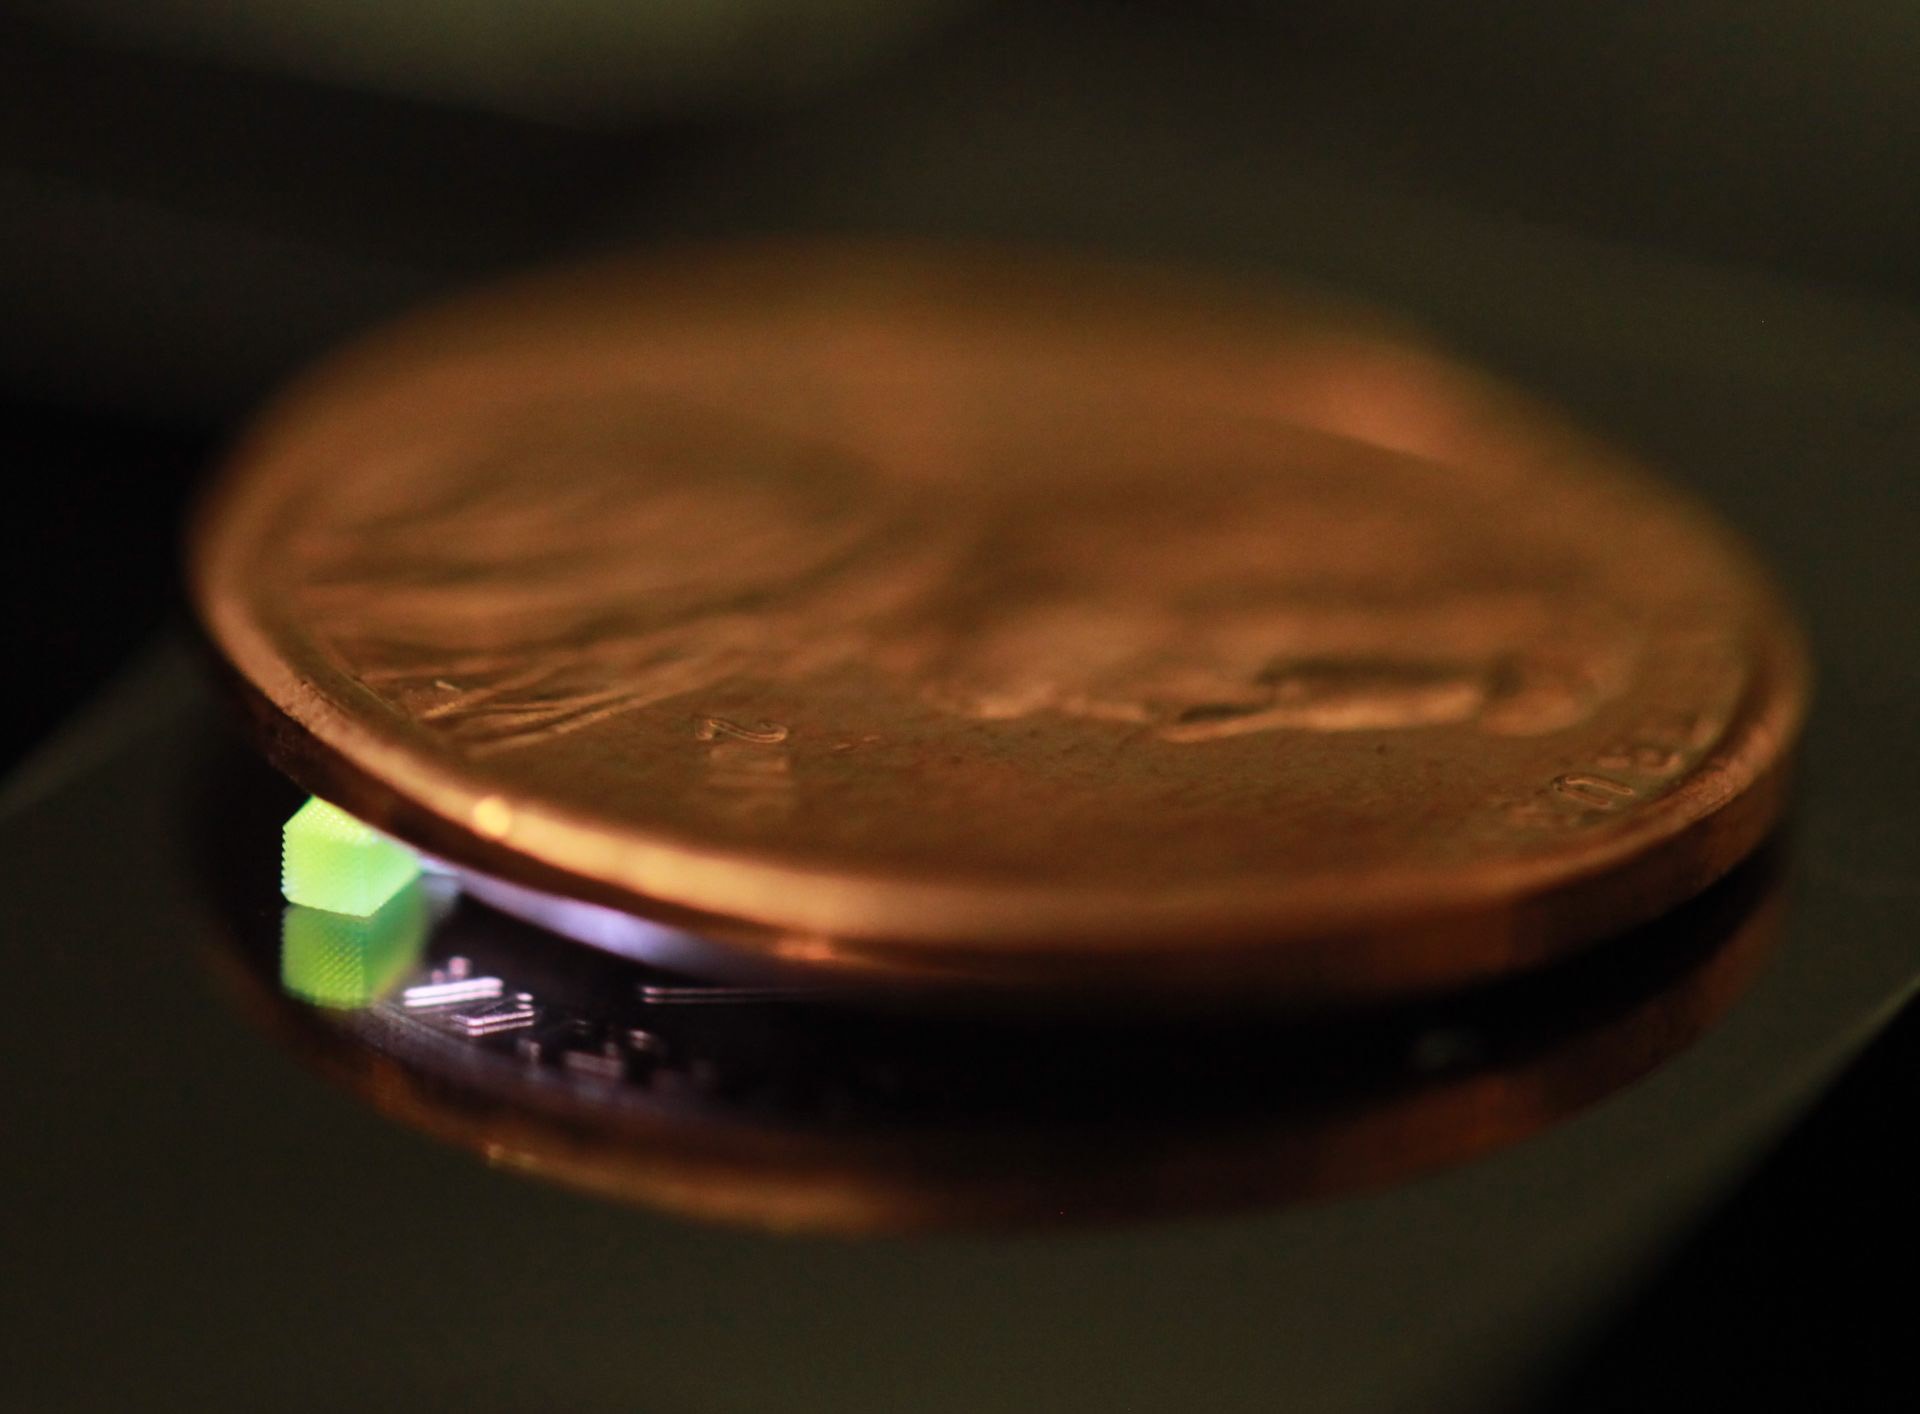 A millimeter-scale structure with submicron features is supported on a U.S. penny on top of a reflective surface